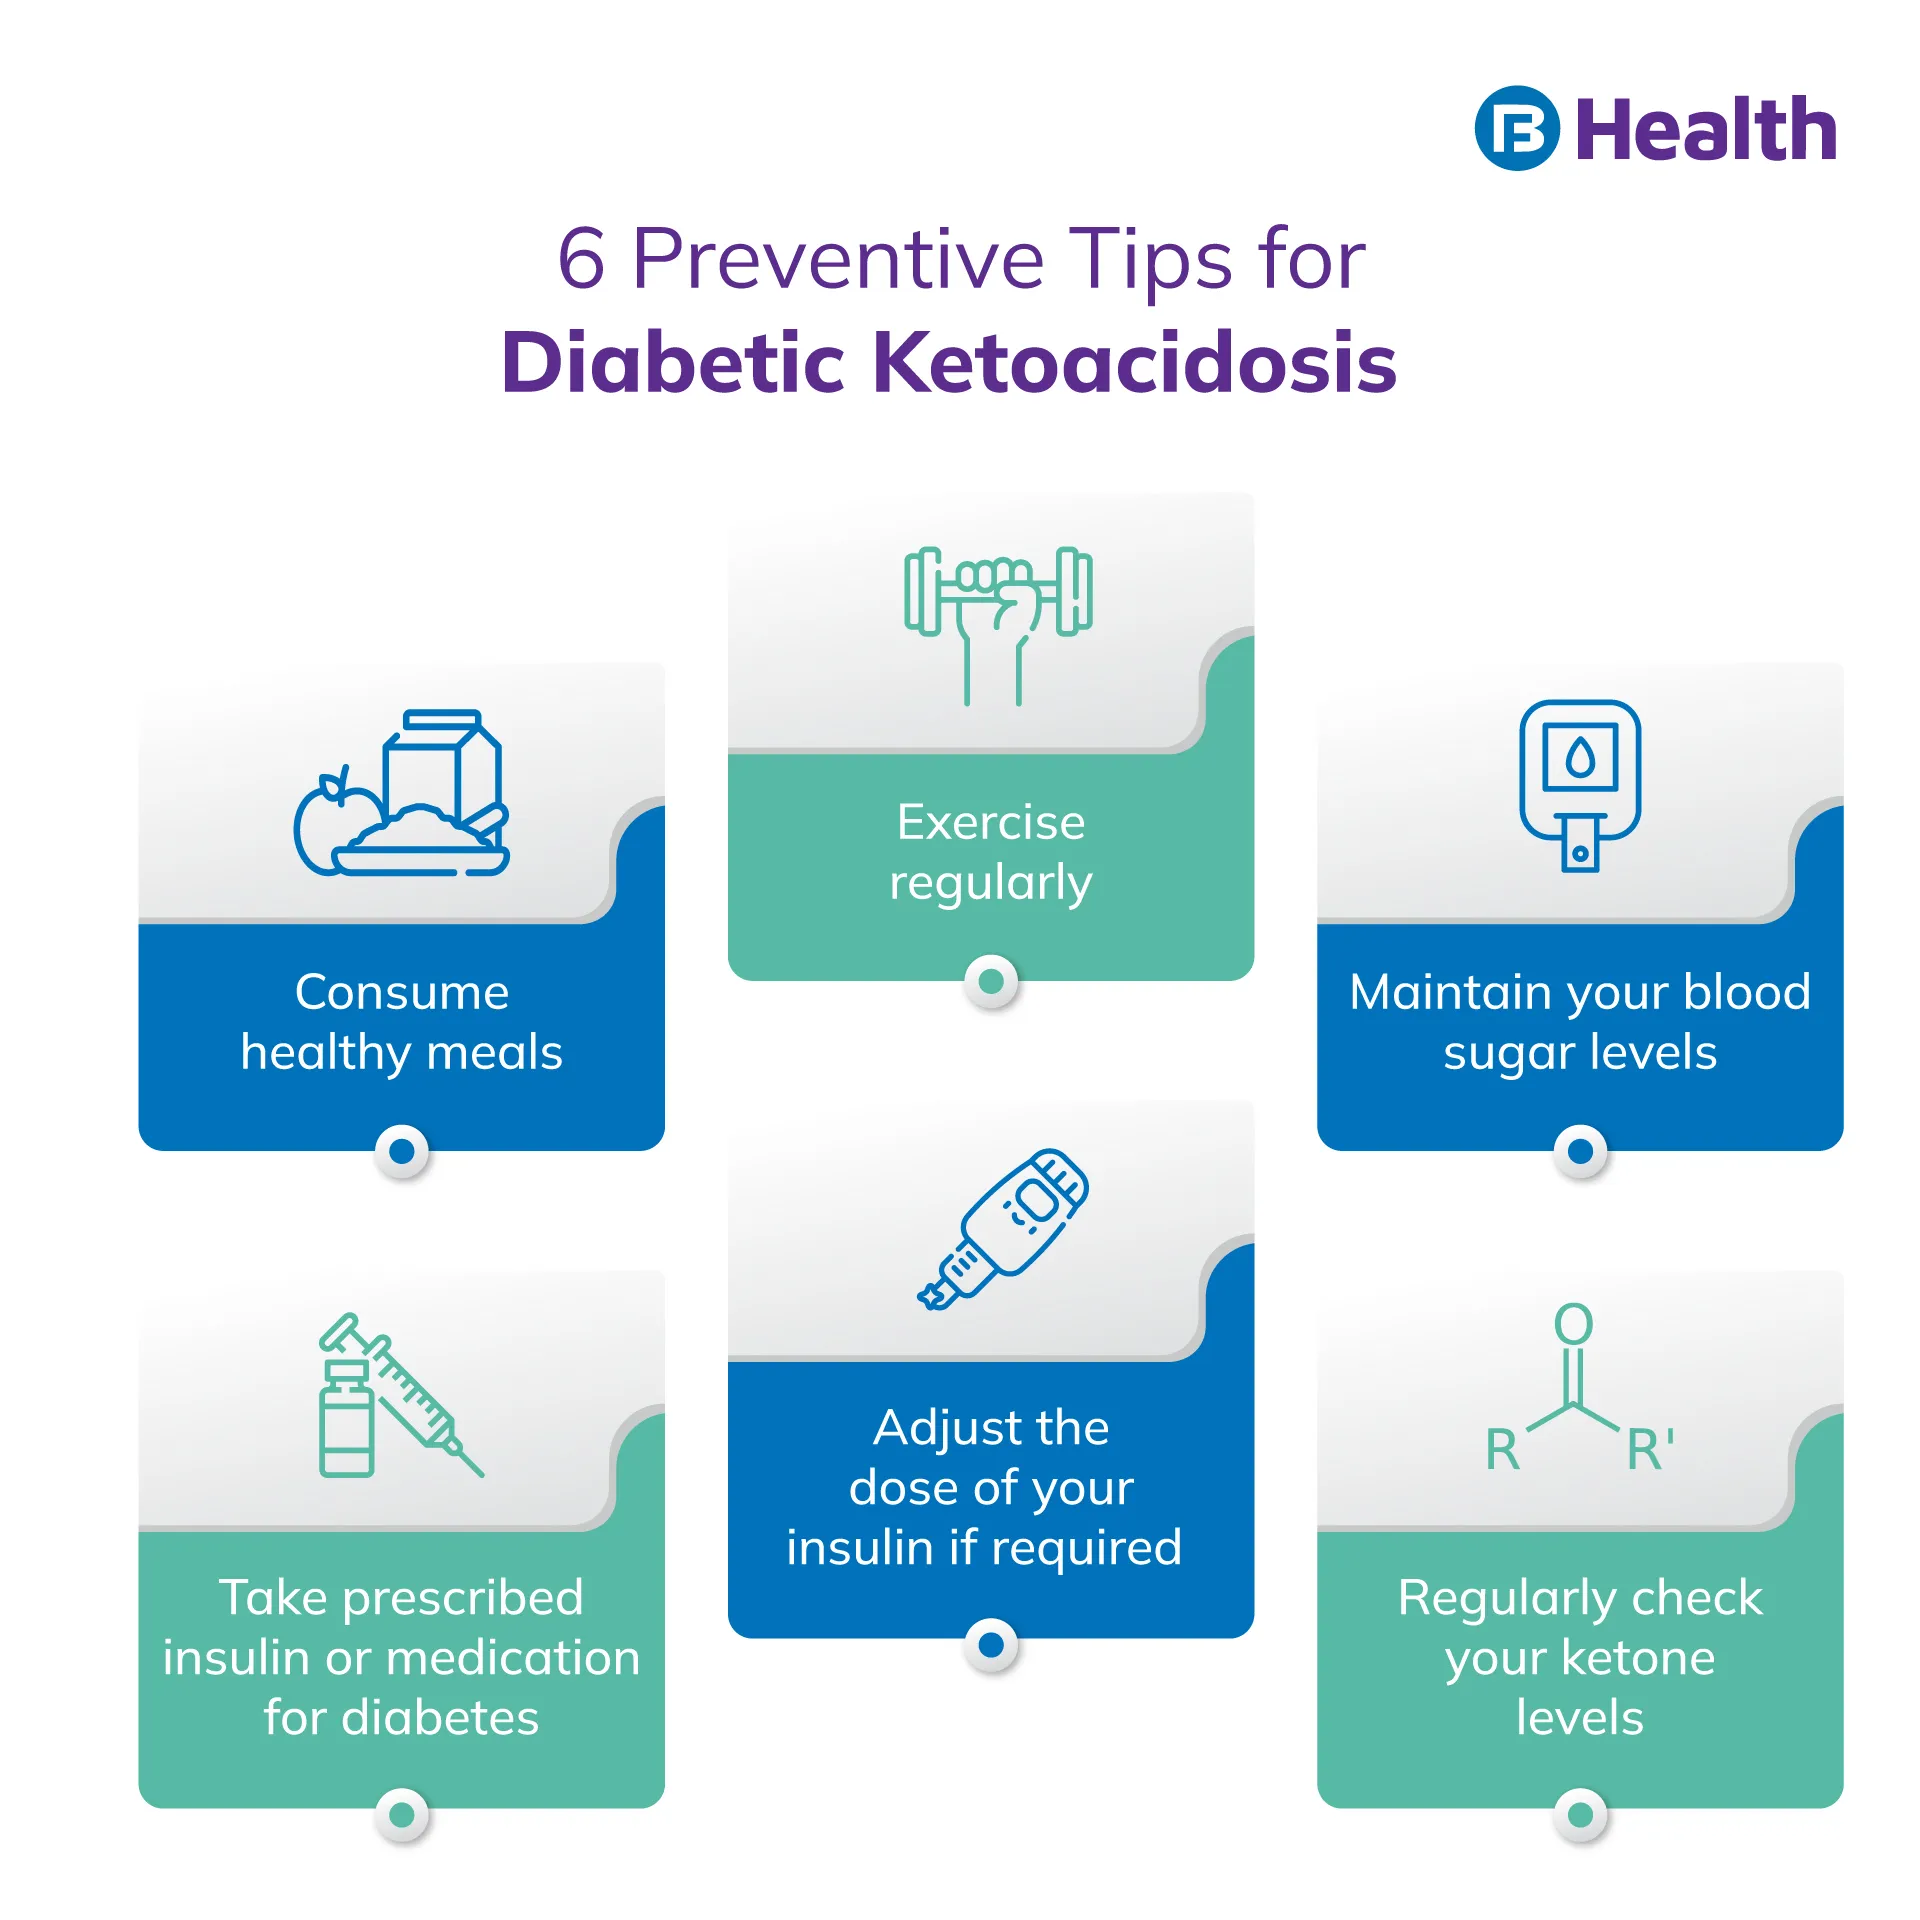 tips for Diabetic Ketoacidosis prevention